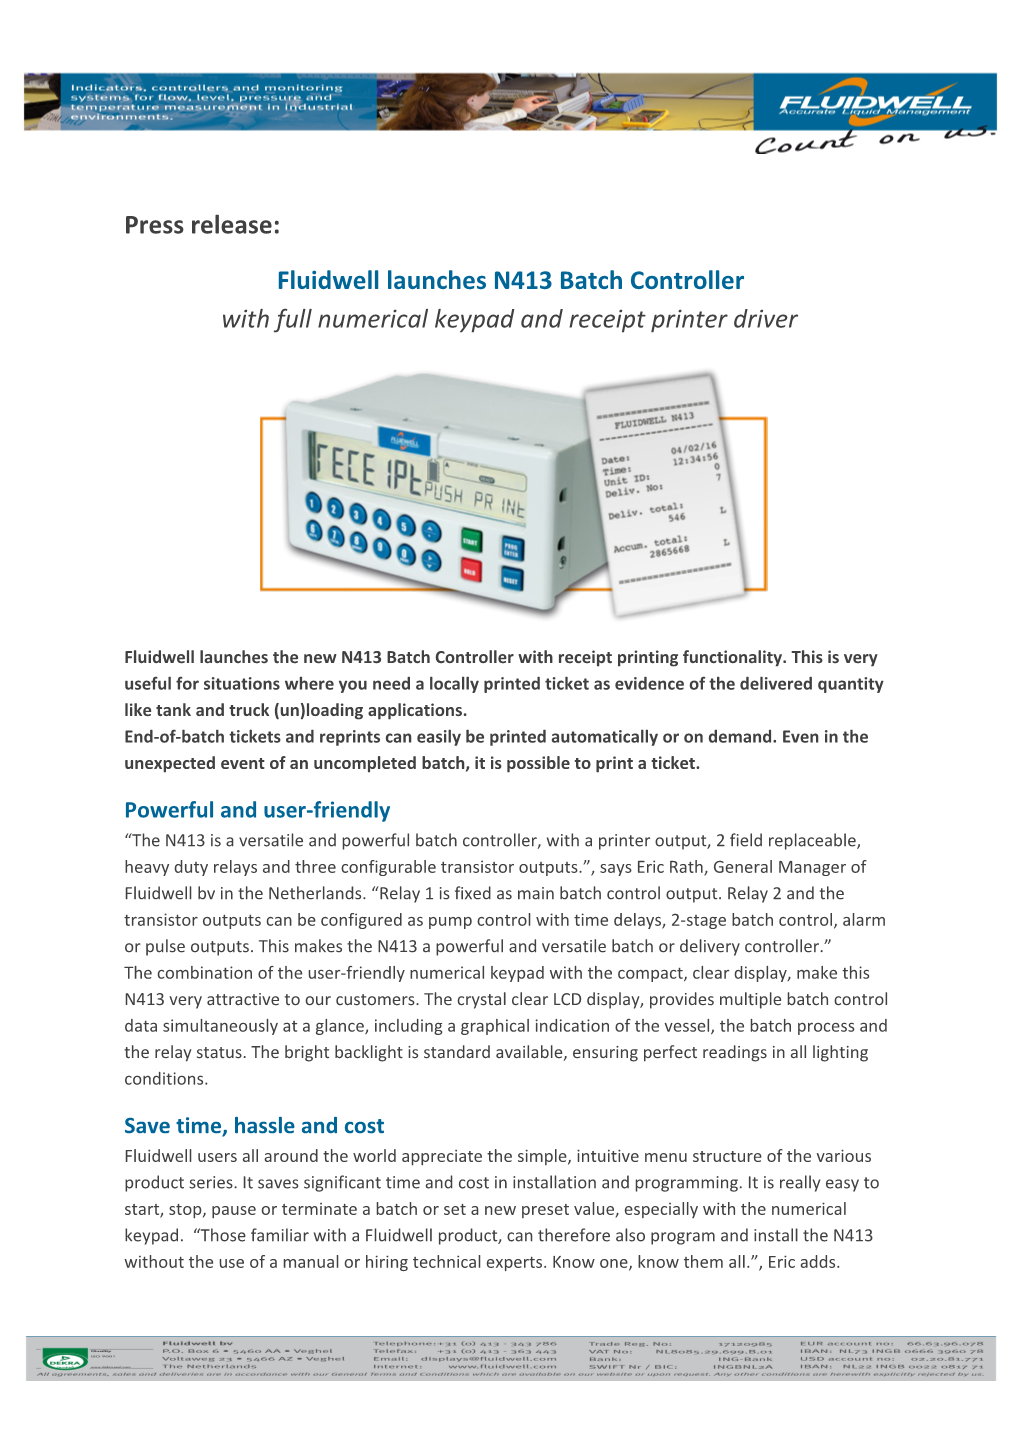 Fluidwell Launches N413 Batch Controller